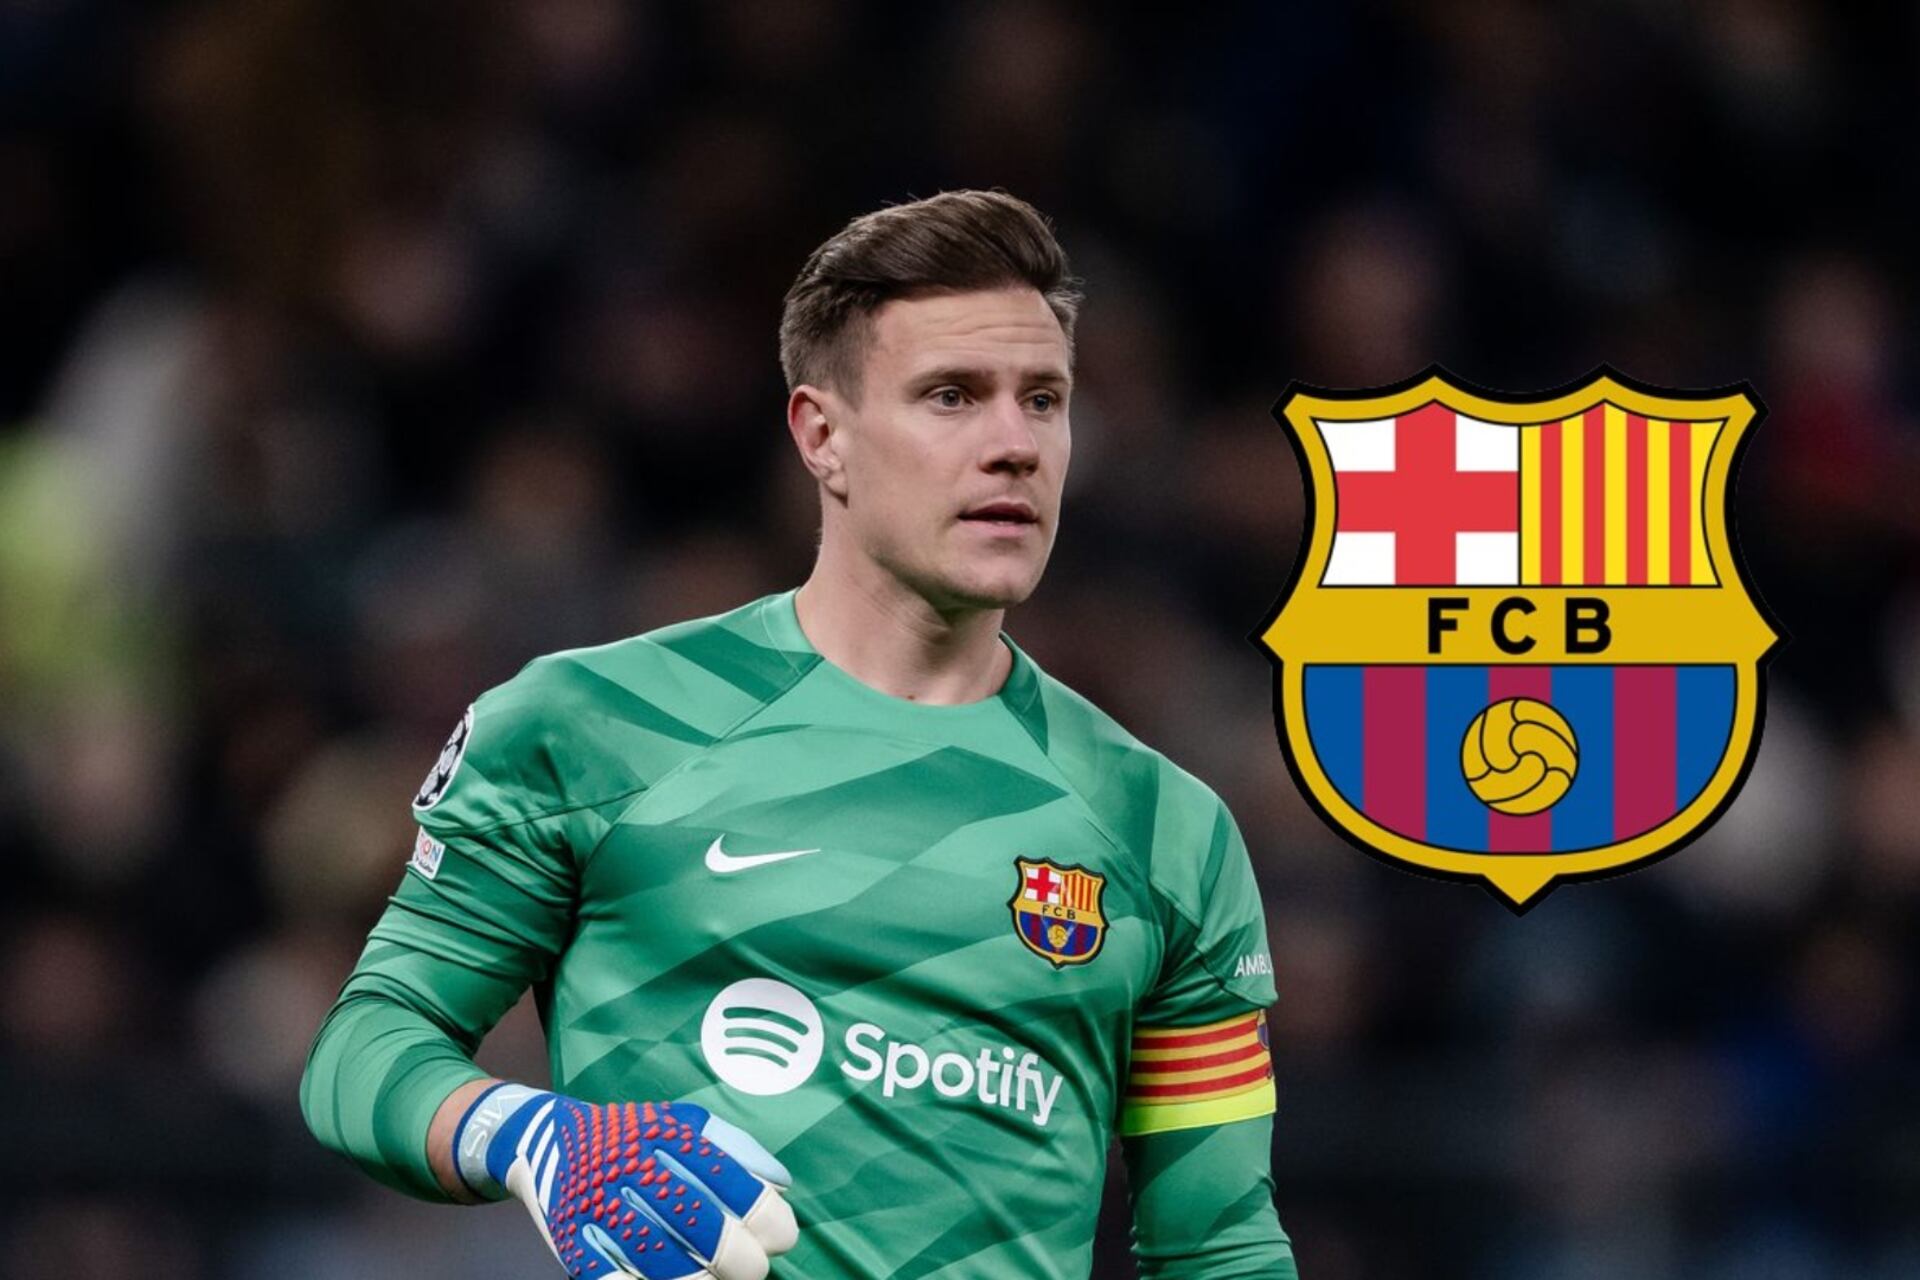 He hasn’t played for a year, but Barcelona will look him as Ter Stegen’s replacement for next season